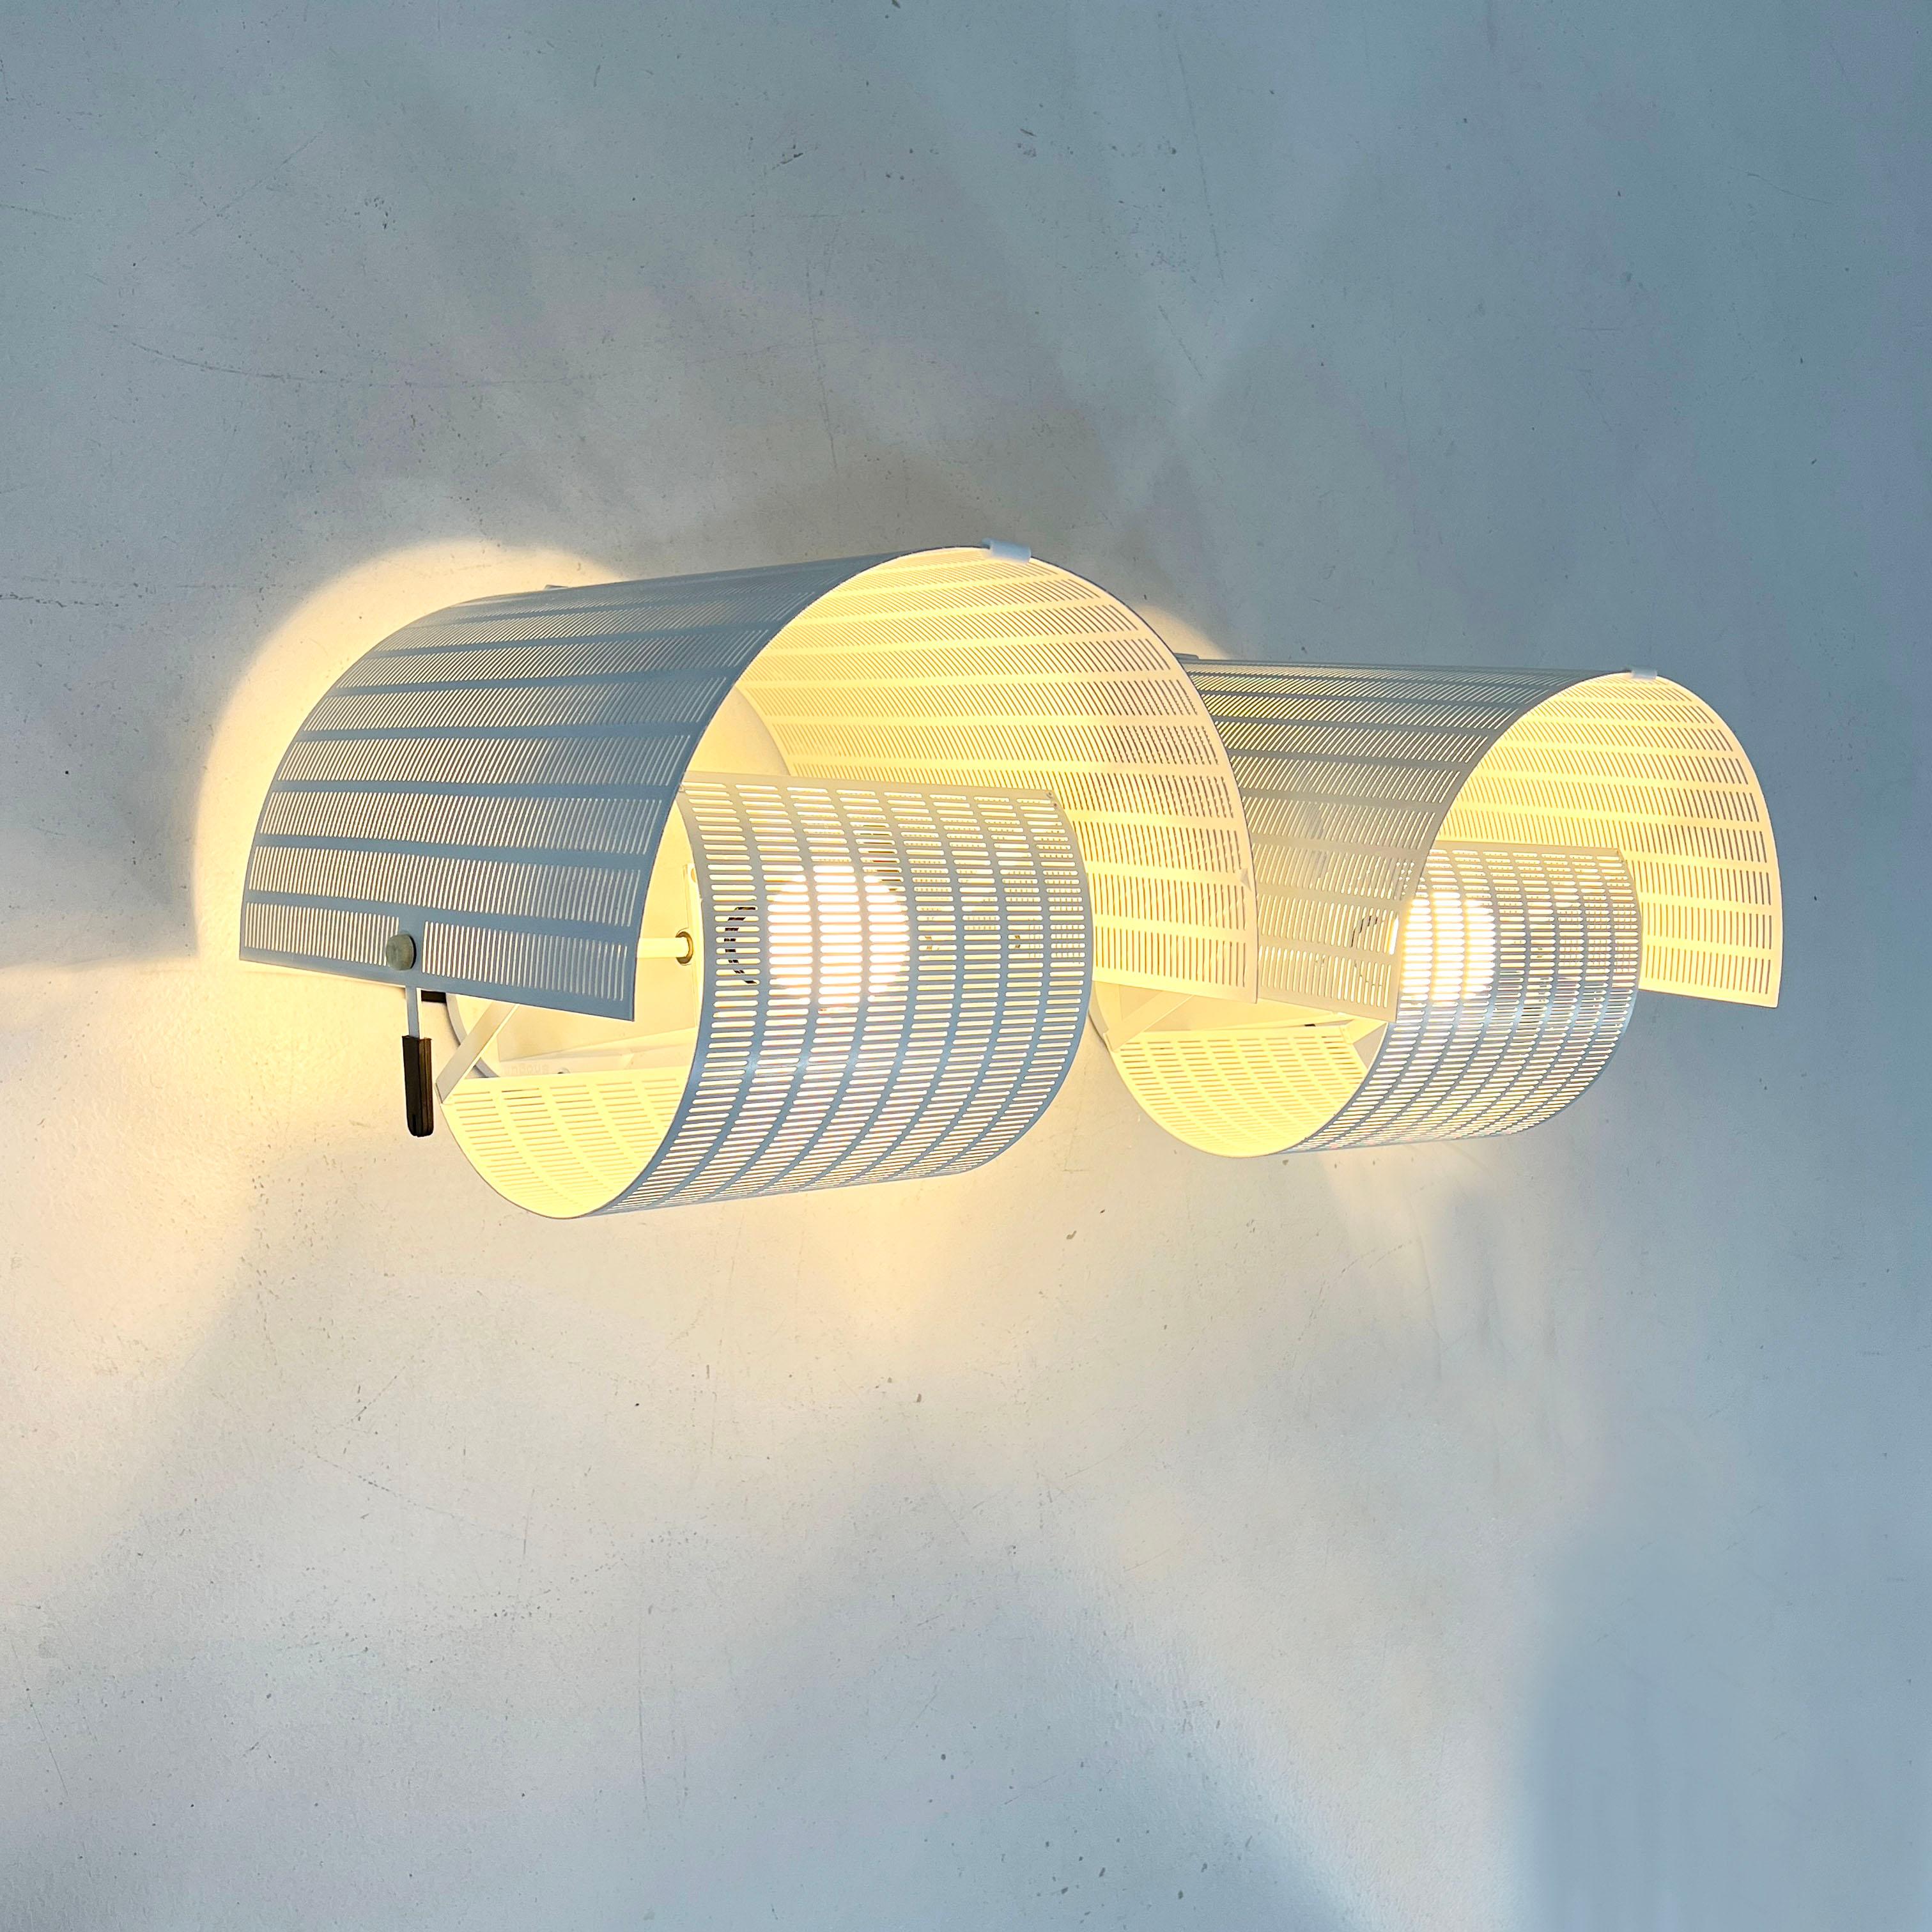 Designer - Mario Botta
Producer - Artemide
Model - Shogun Wall Lamp
Design Period - Eigthies
Measurements - Width 34 cm x Depth 33 cm x Height 32 cm
Materials - Cast Iron, Steel 
Color - White
Light wear consistent with age and use. Some light